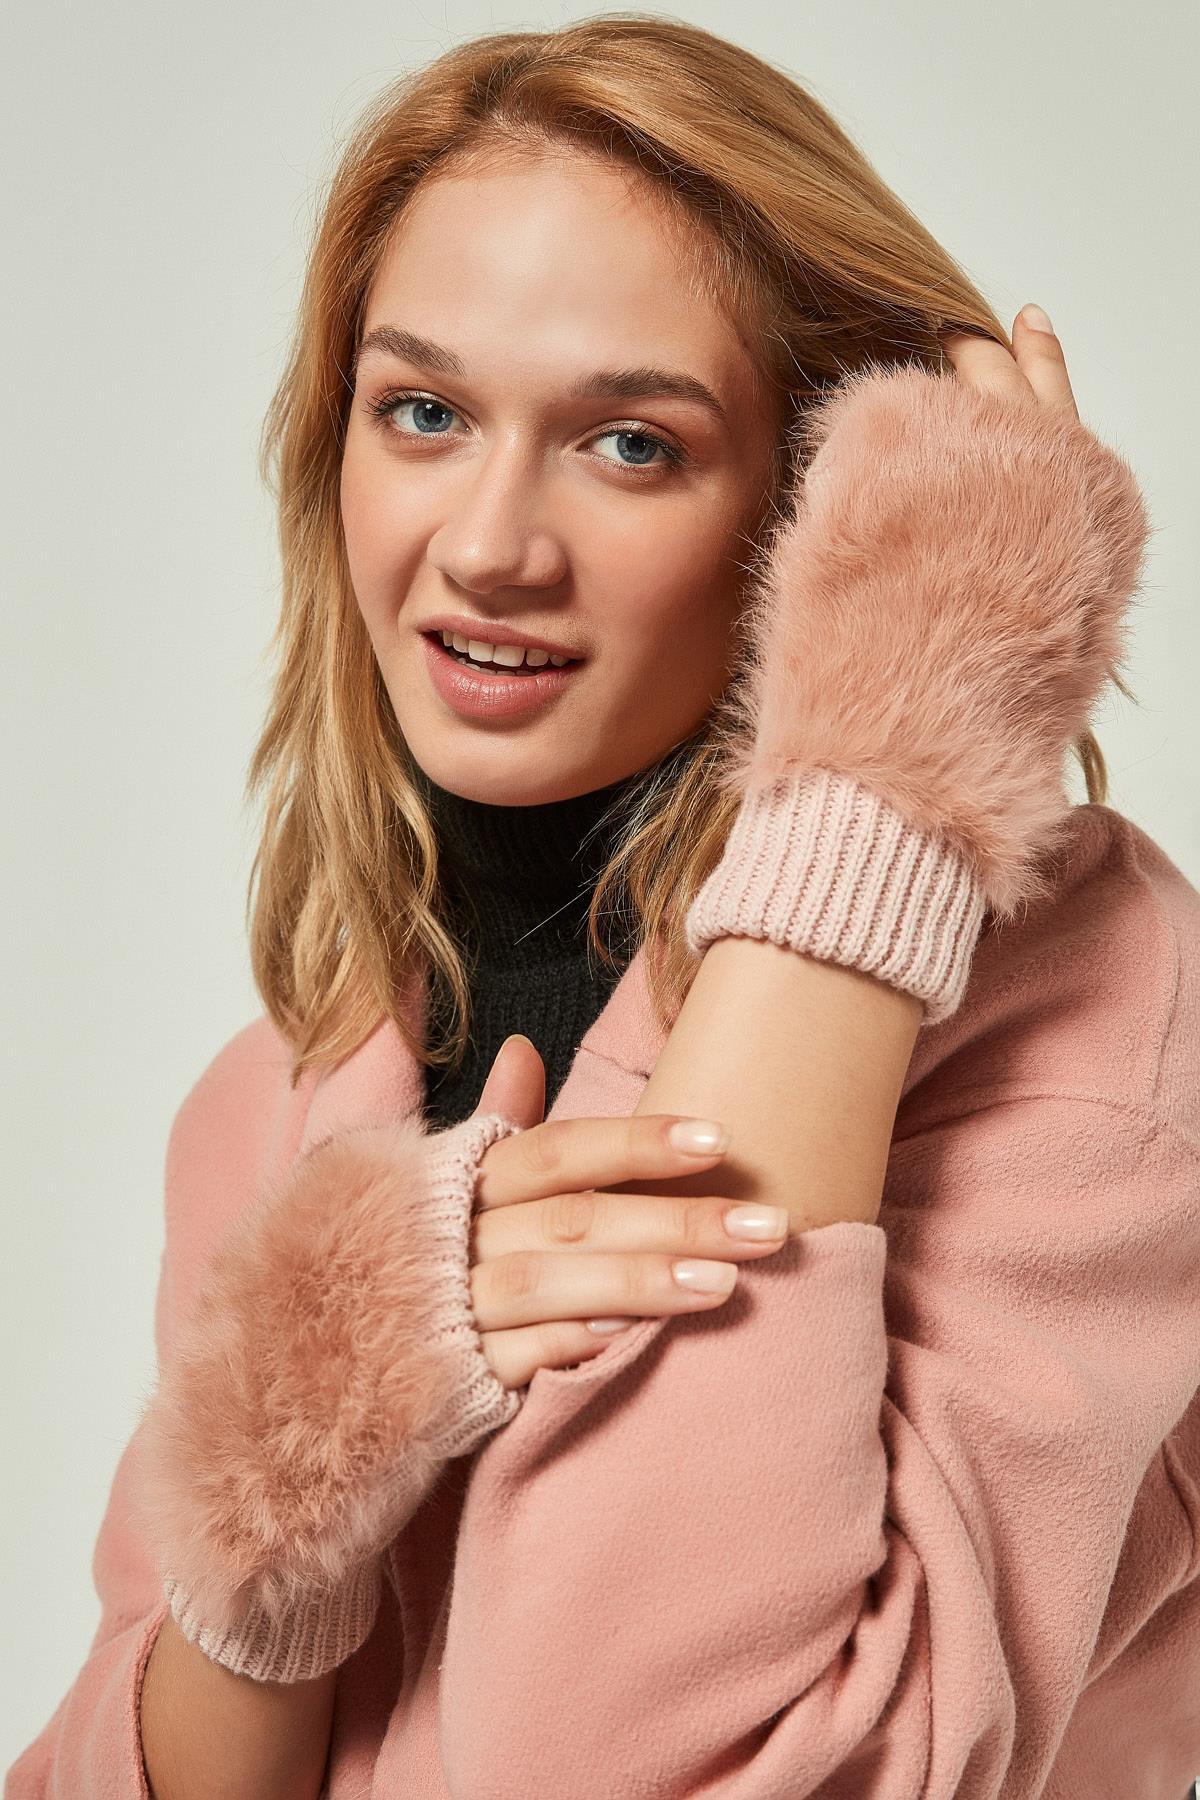 A model wears NSV11233 - Furry Wool Cut-Out Gloves Yl - Pink, wholesale Glove of Nesvay to display at Lonca